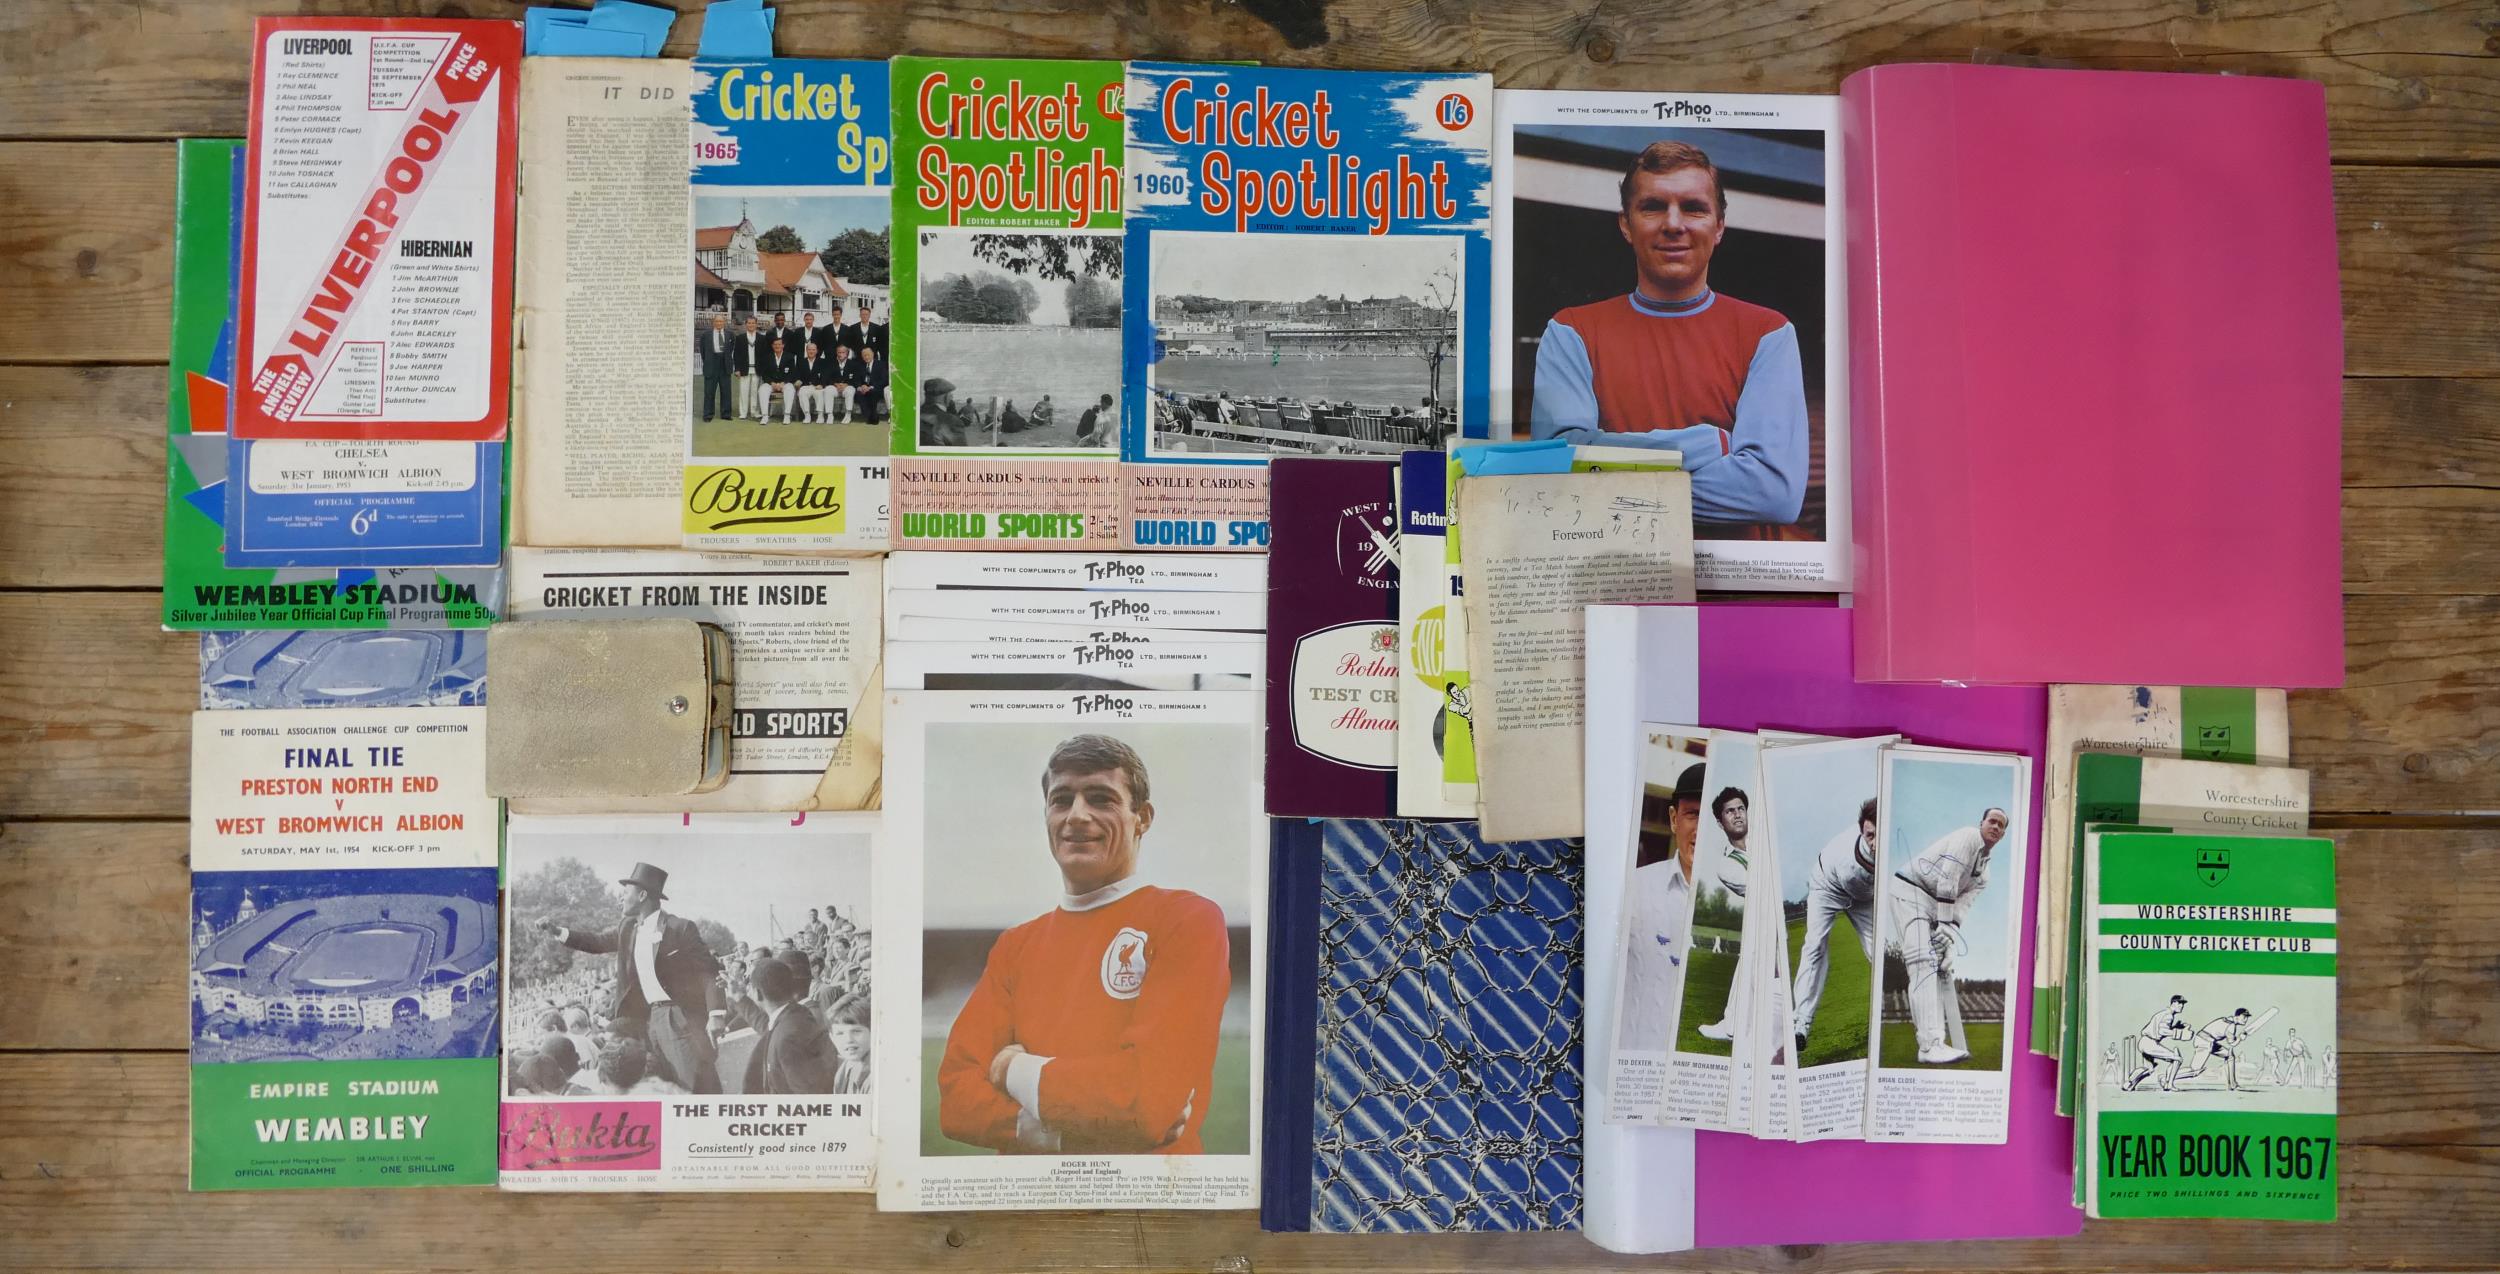 A very interesting and comprehensive group of 1960s cricketing memorabilia, including signatures,